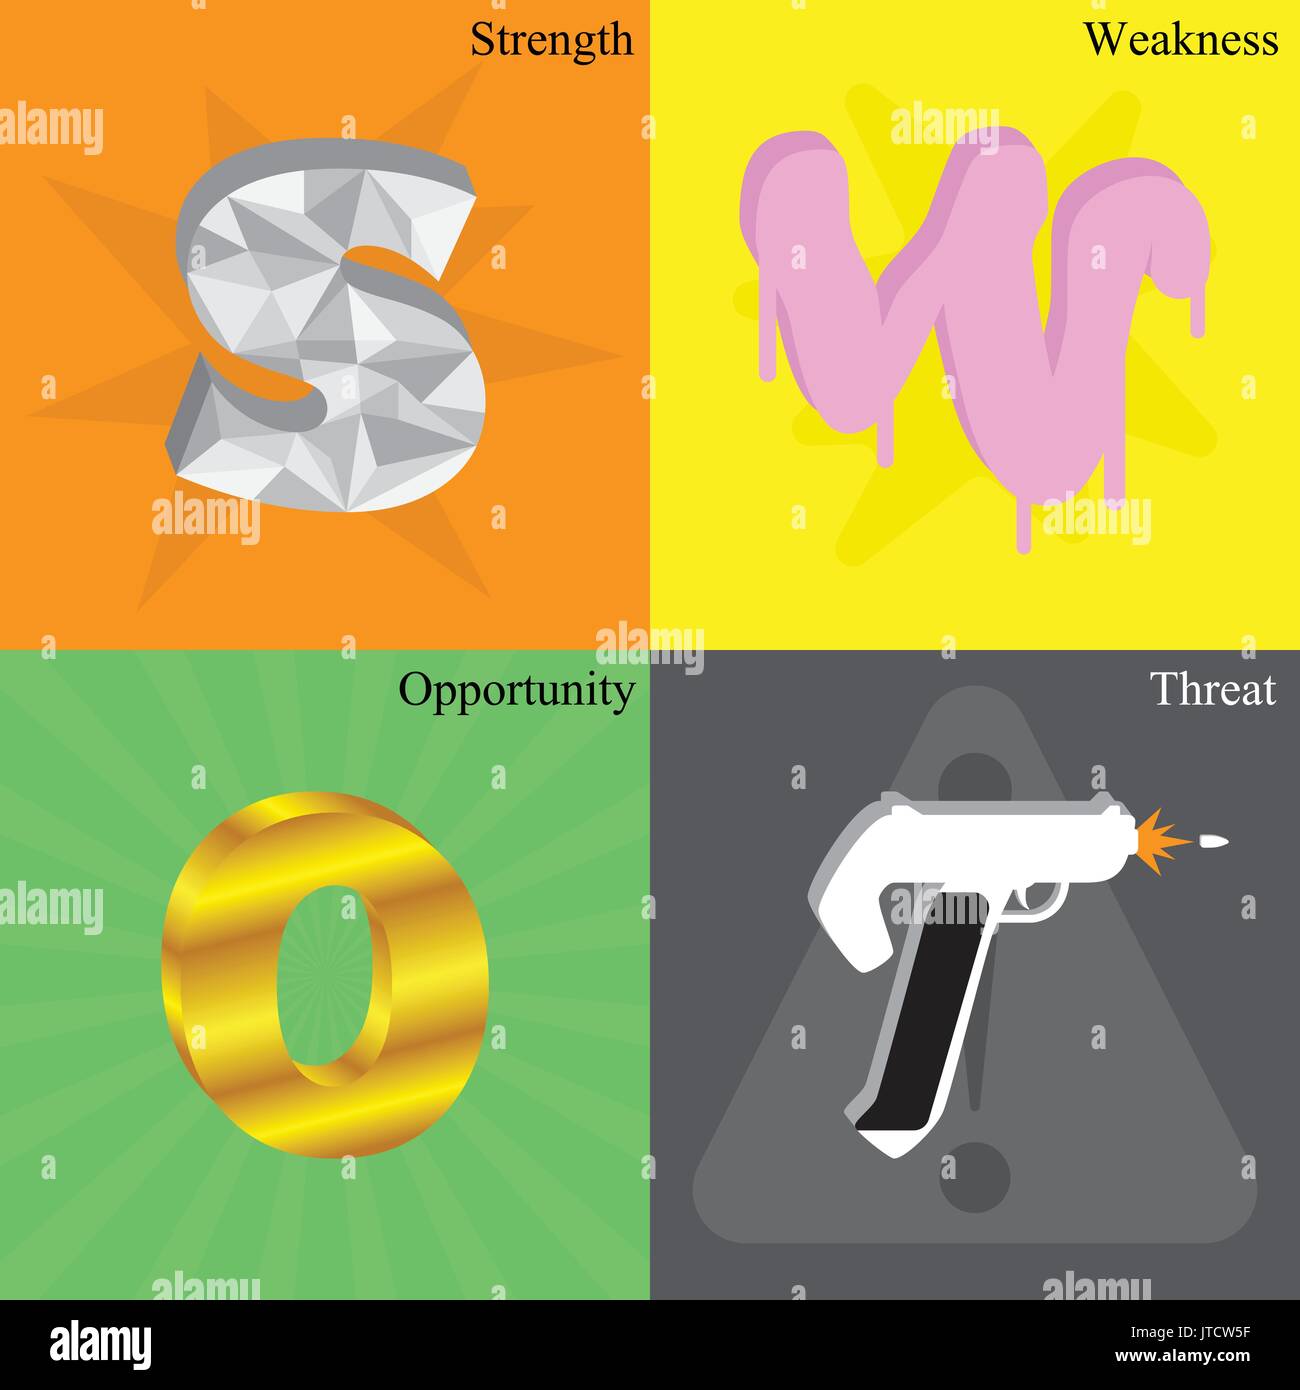 Business & Education As SWOT Chart Means Strength, Weakness, Opportunity, Threat. The SW Are Controllable Factors And The OT Are Uncontrollable Ones. Stock Vector